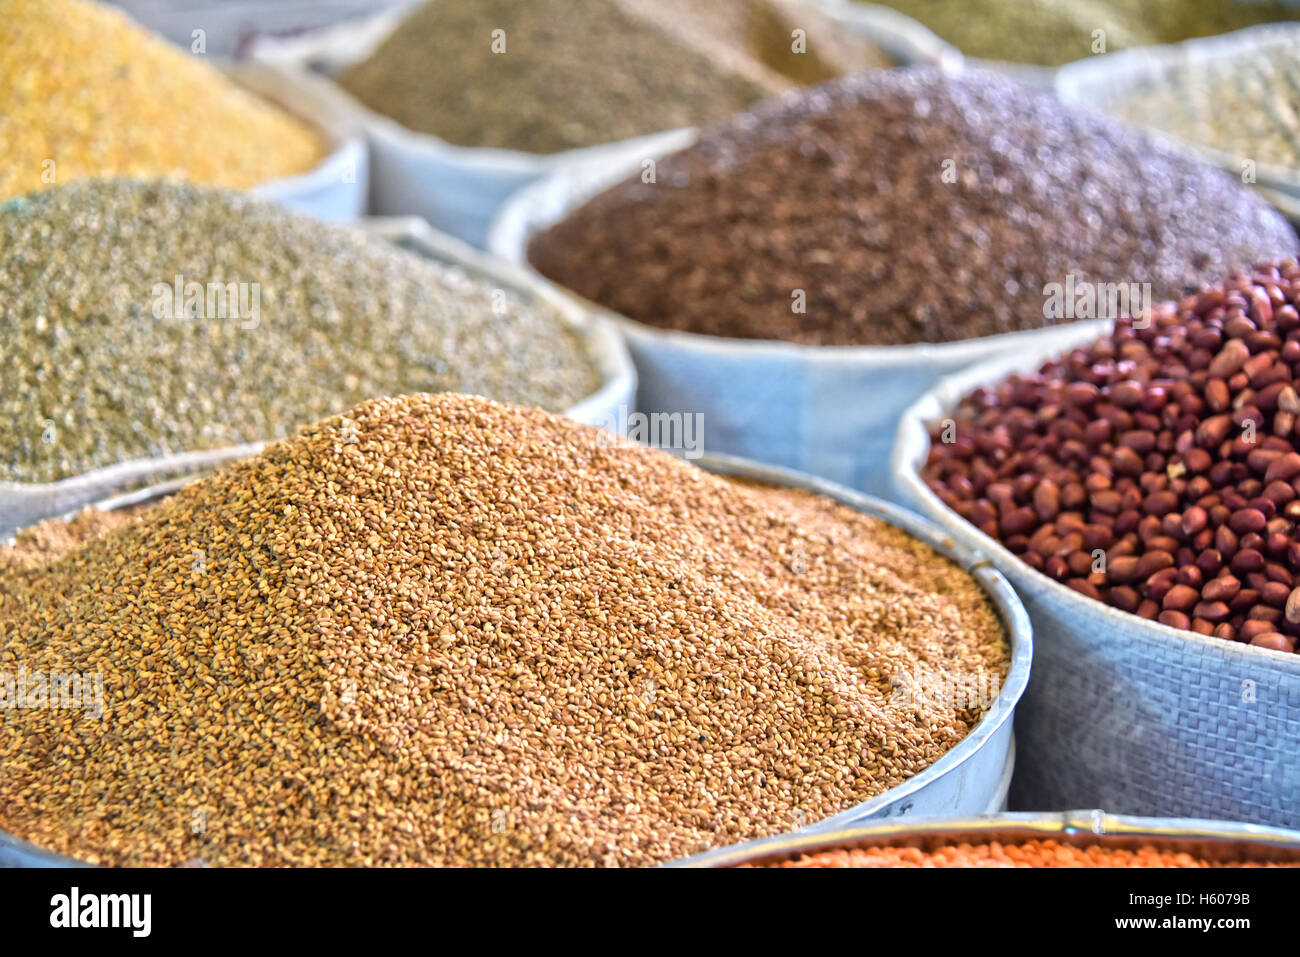 Dried food products on the arab street market stall. Stock Photo